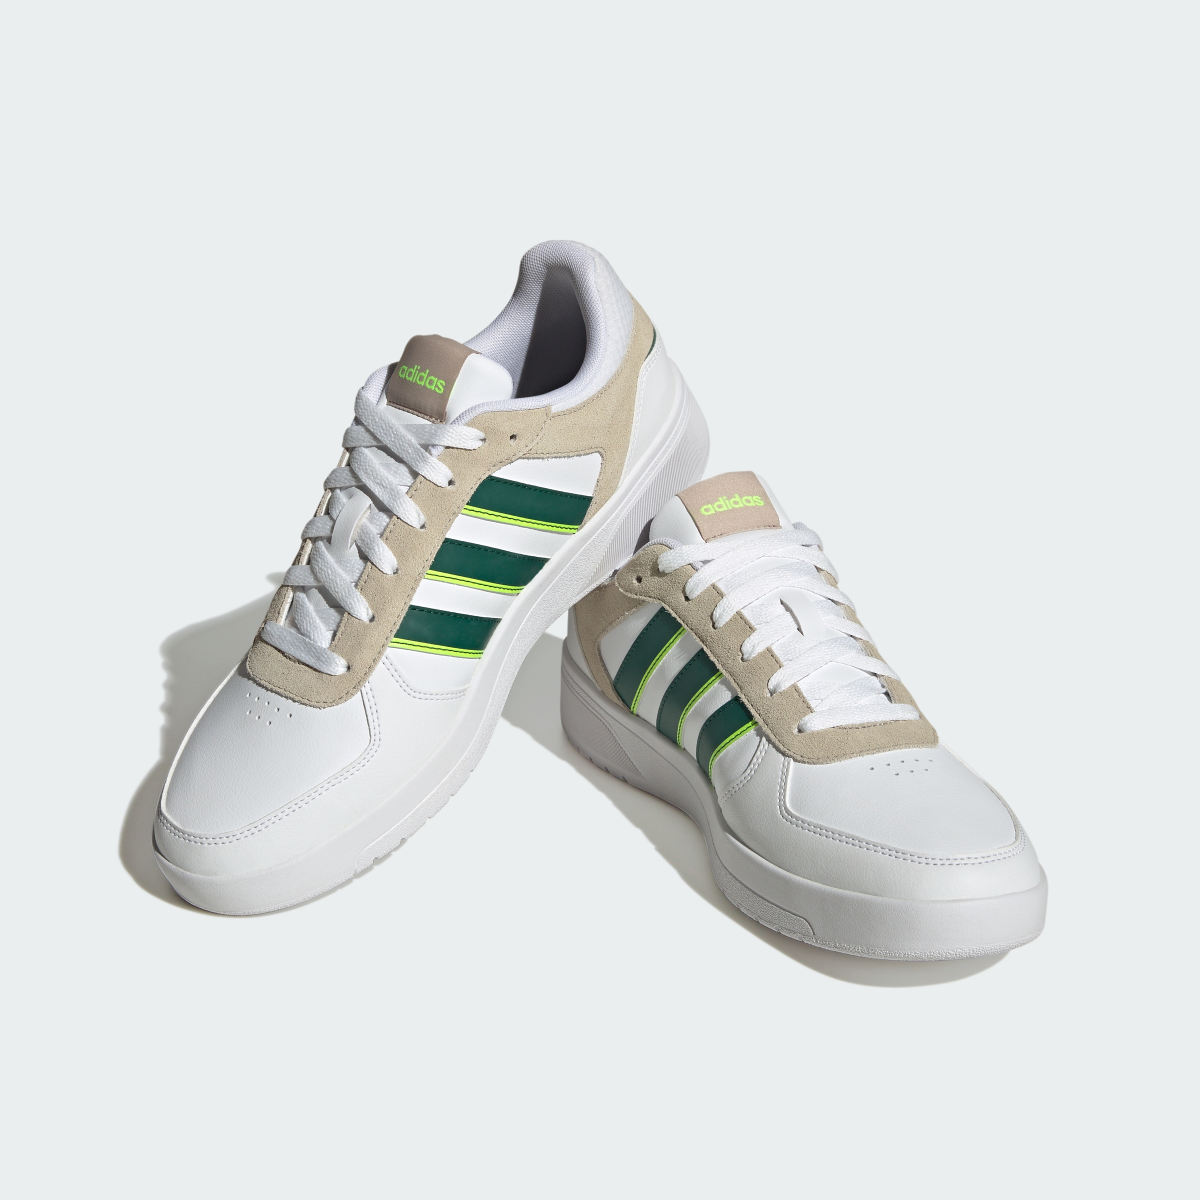 Adidas Courtbeat Shoes. 5